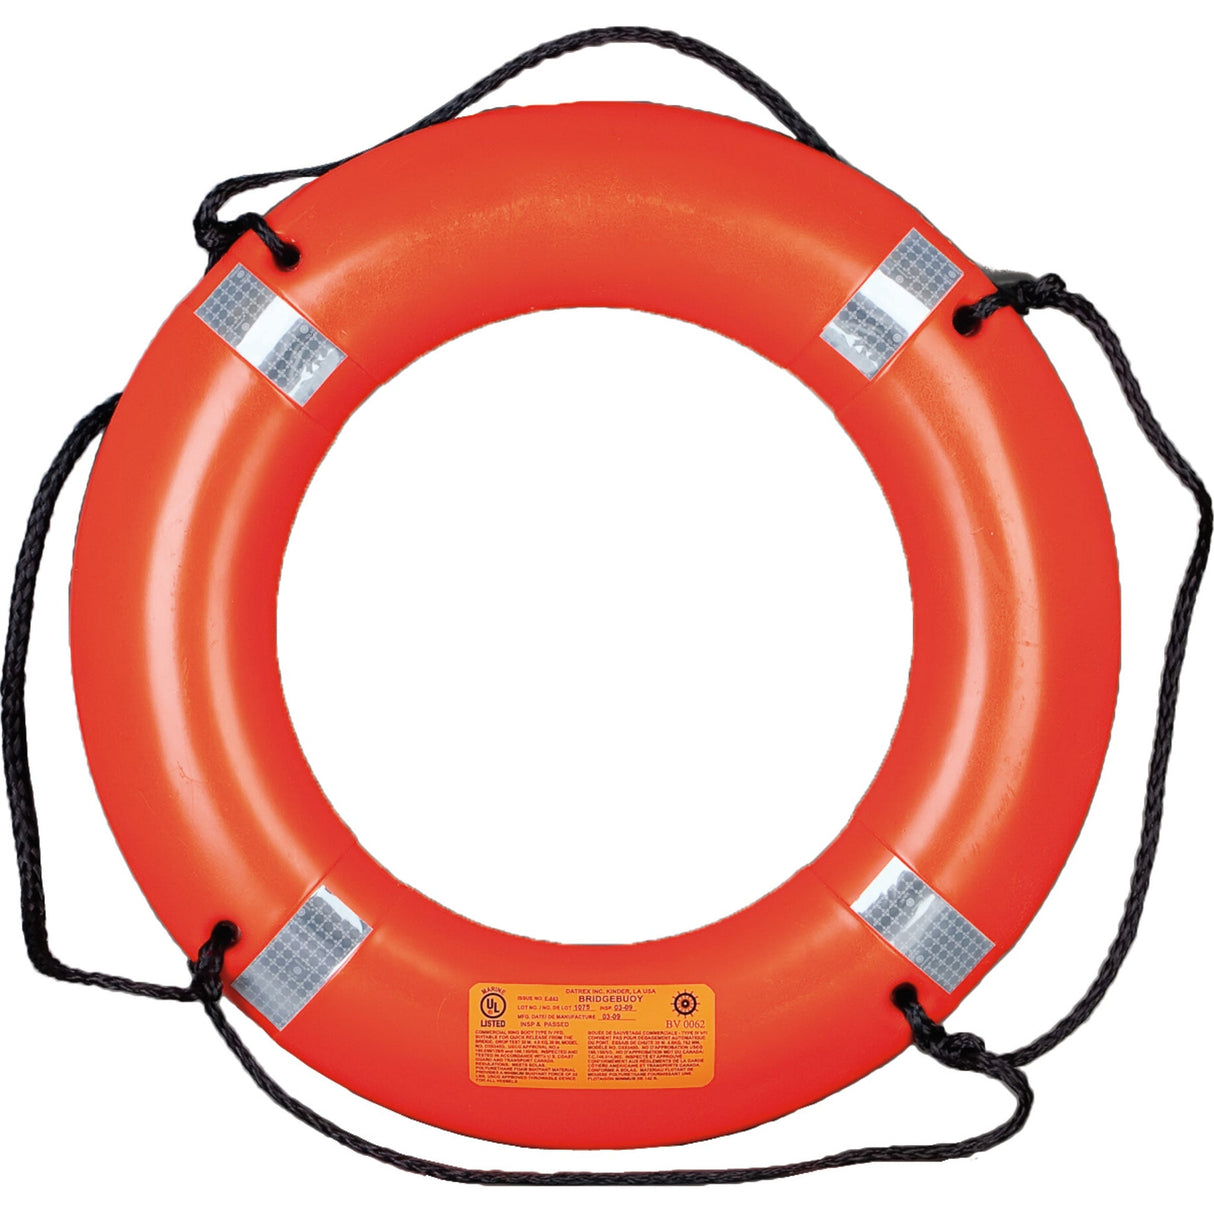 MUSTANG 30' RING BUOY WITH REFLECTIVE TAPE